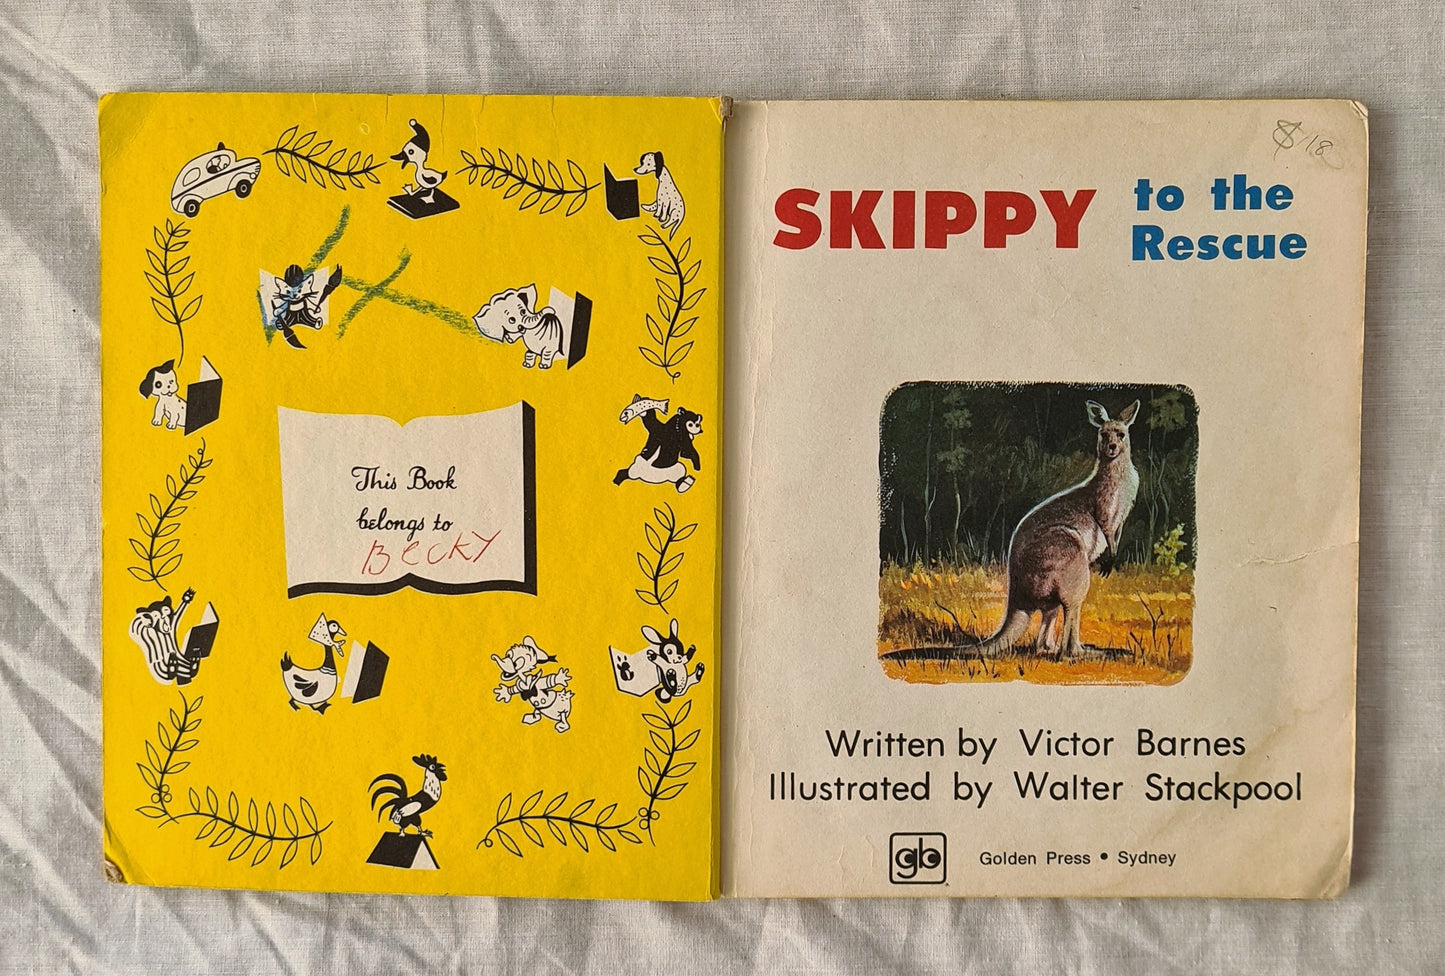 Skippy to the Rescue by Victor Barnes